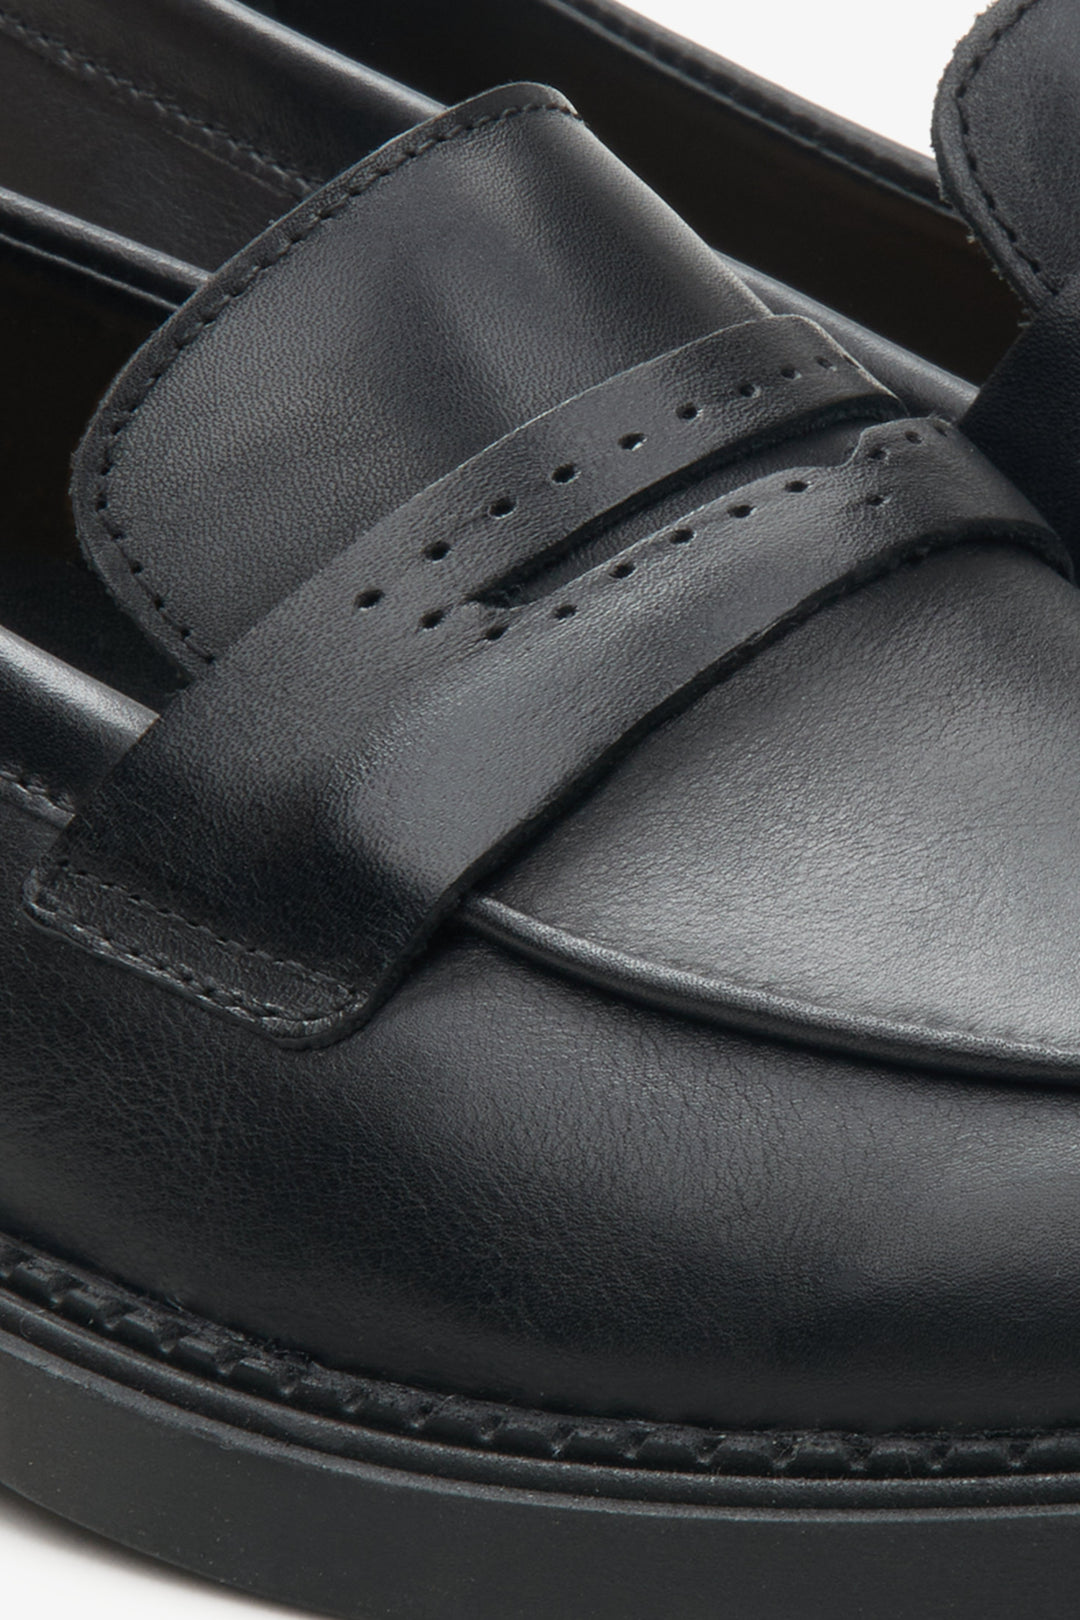 Women's black loafers made of genuine leather - close-up on the details.